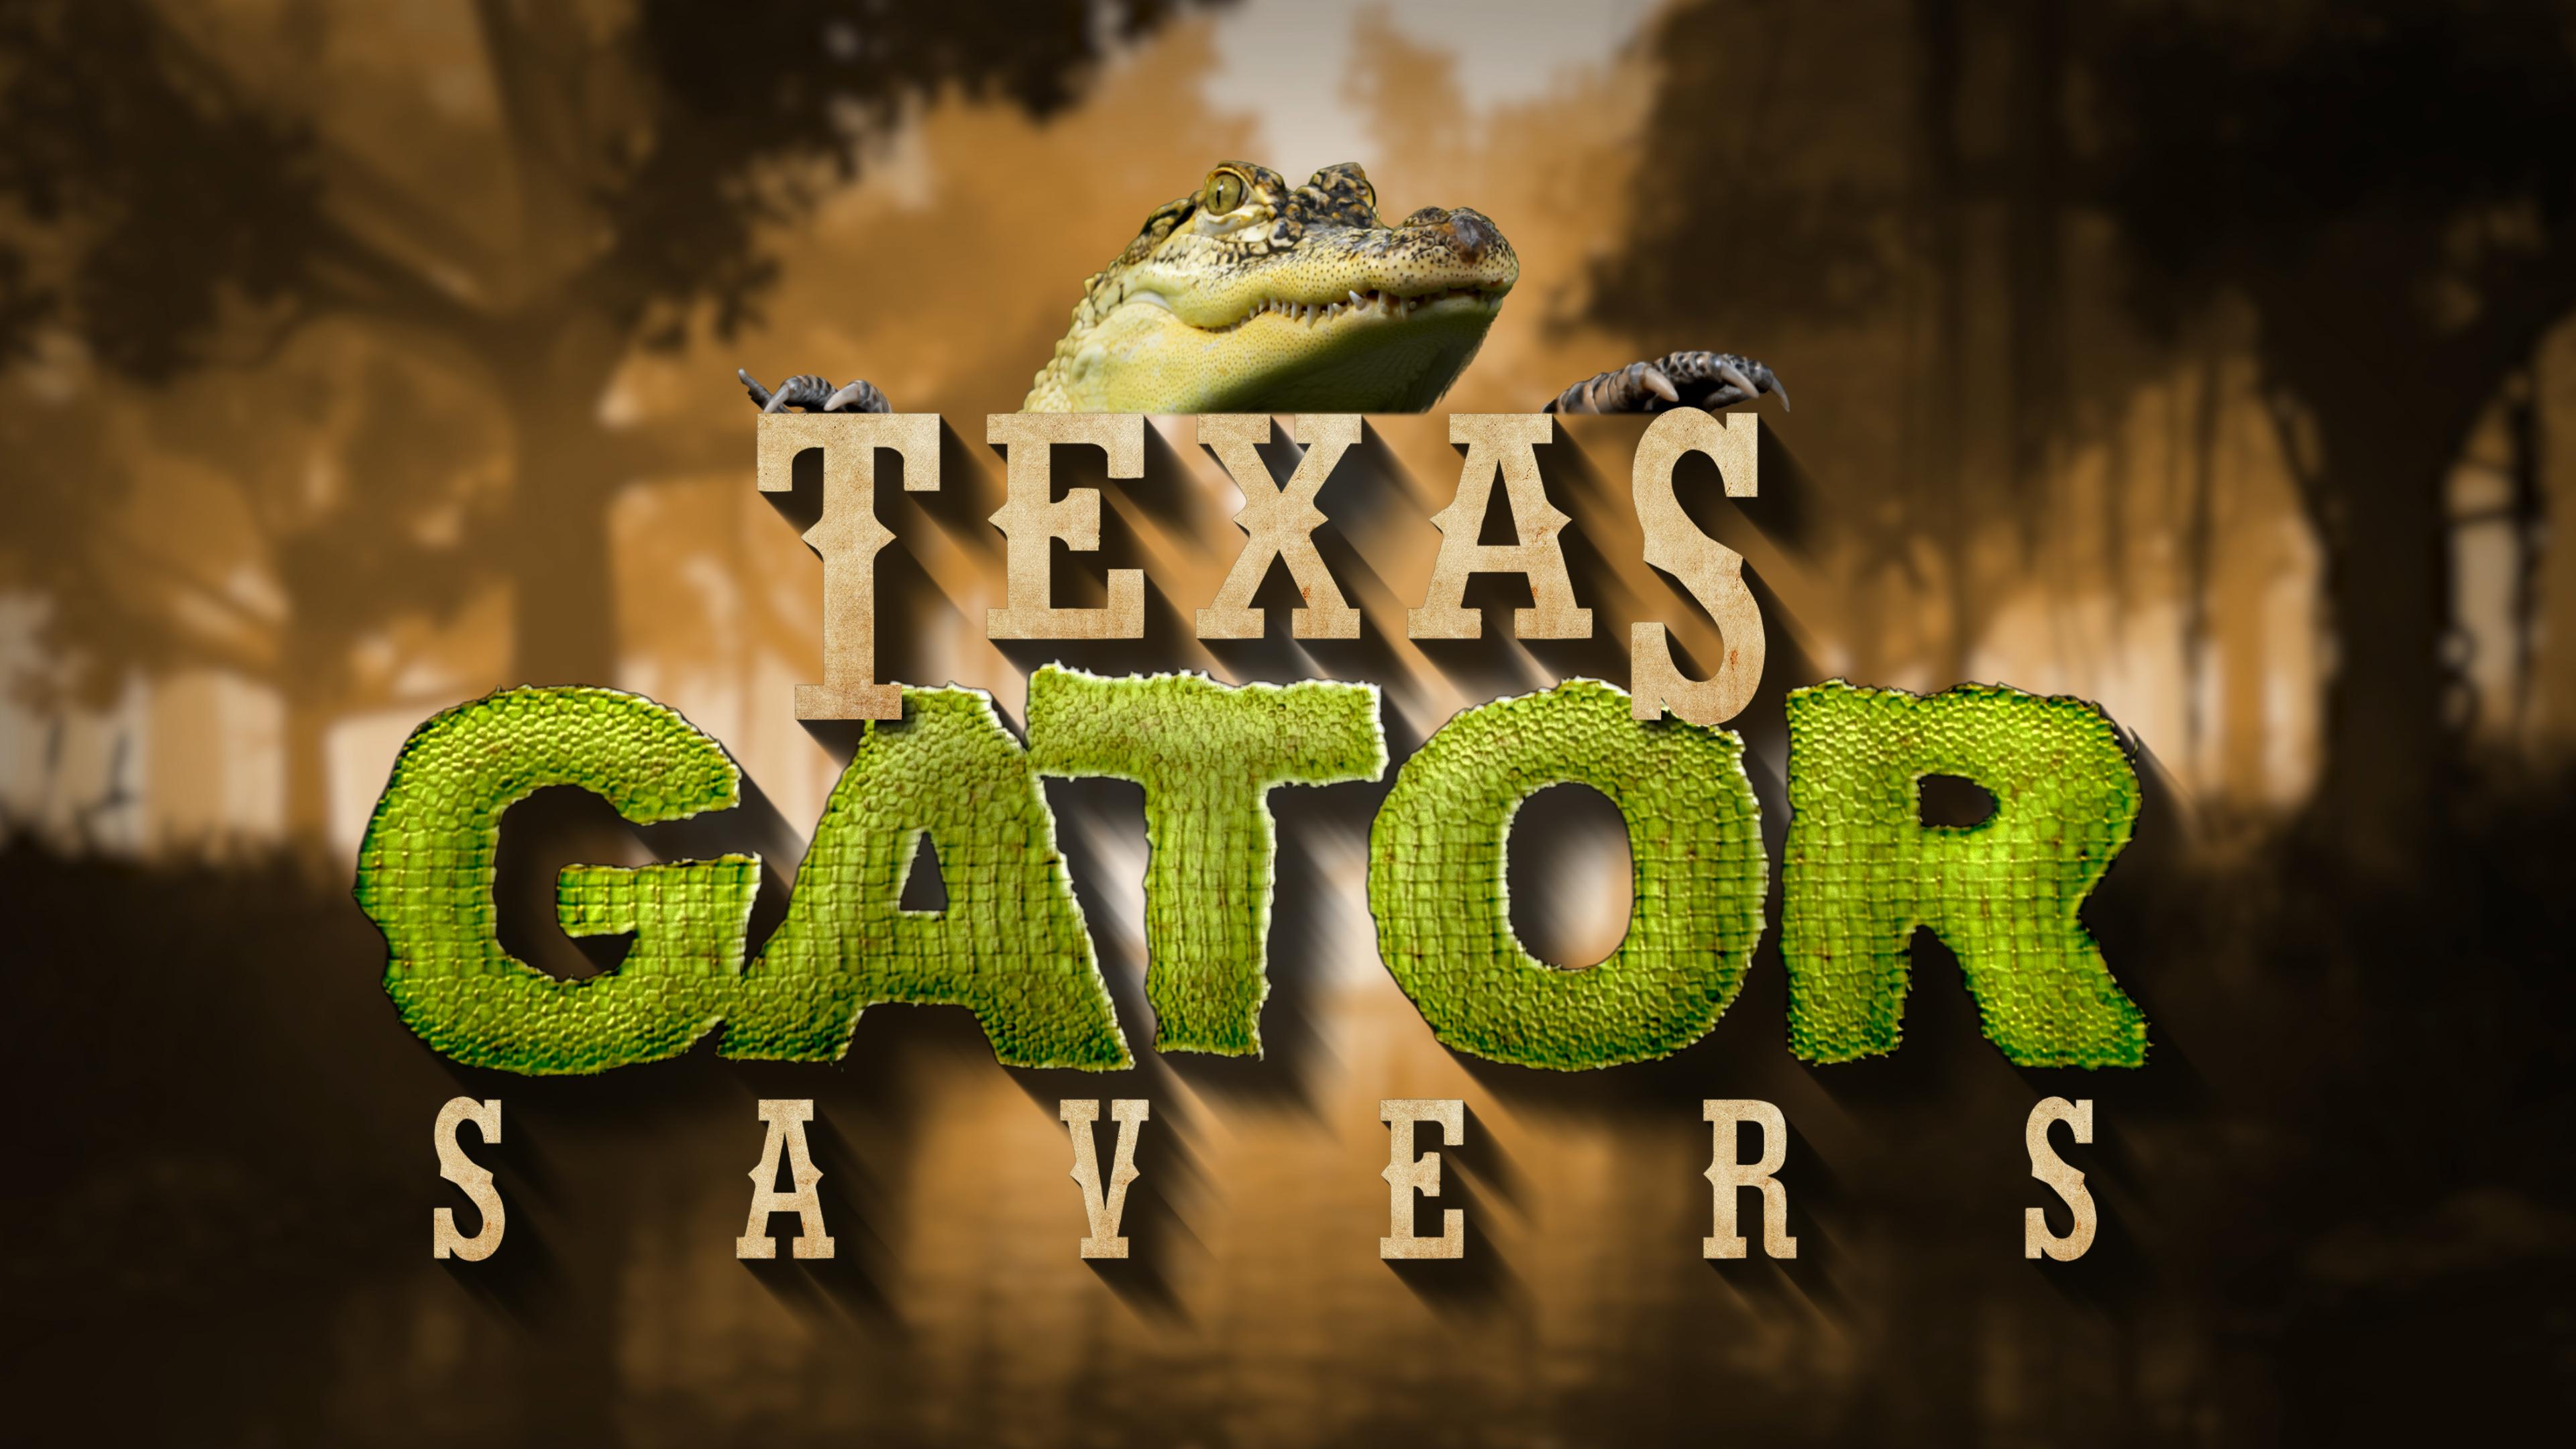 Watch Texas Gator Savers Streaming Online on Philo (Free Trial)